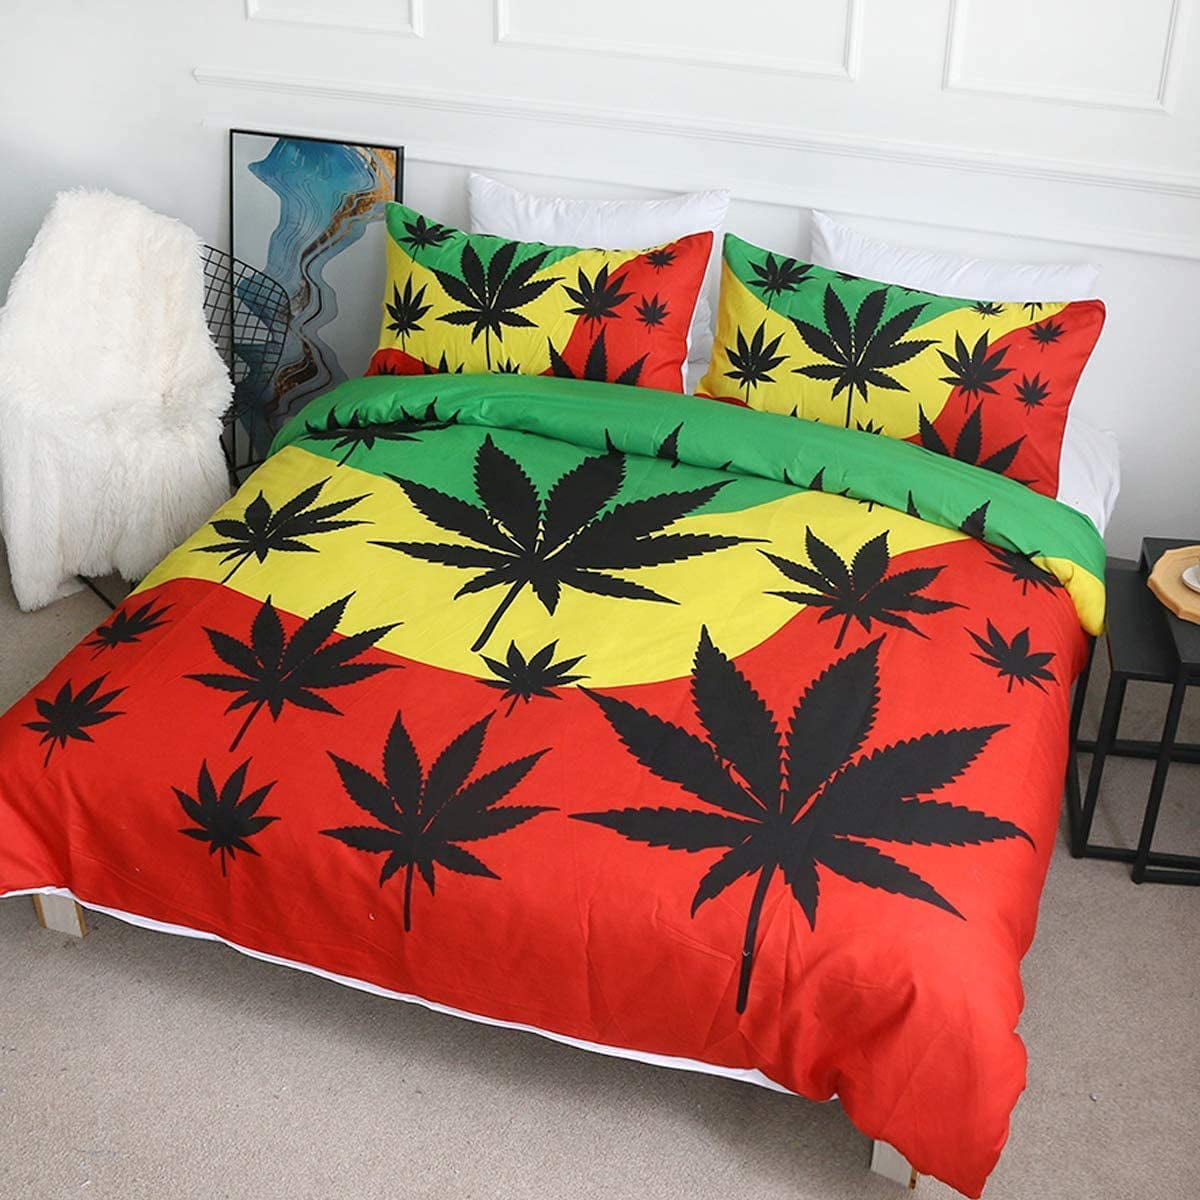 Double Cannabis Marijuana Leaf Weed Green Black Duvet Cover Quilt Bedding Sets 